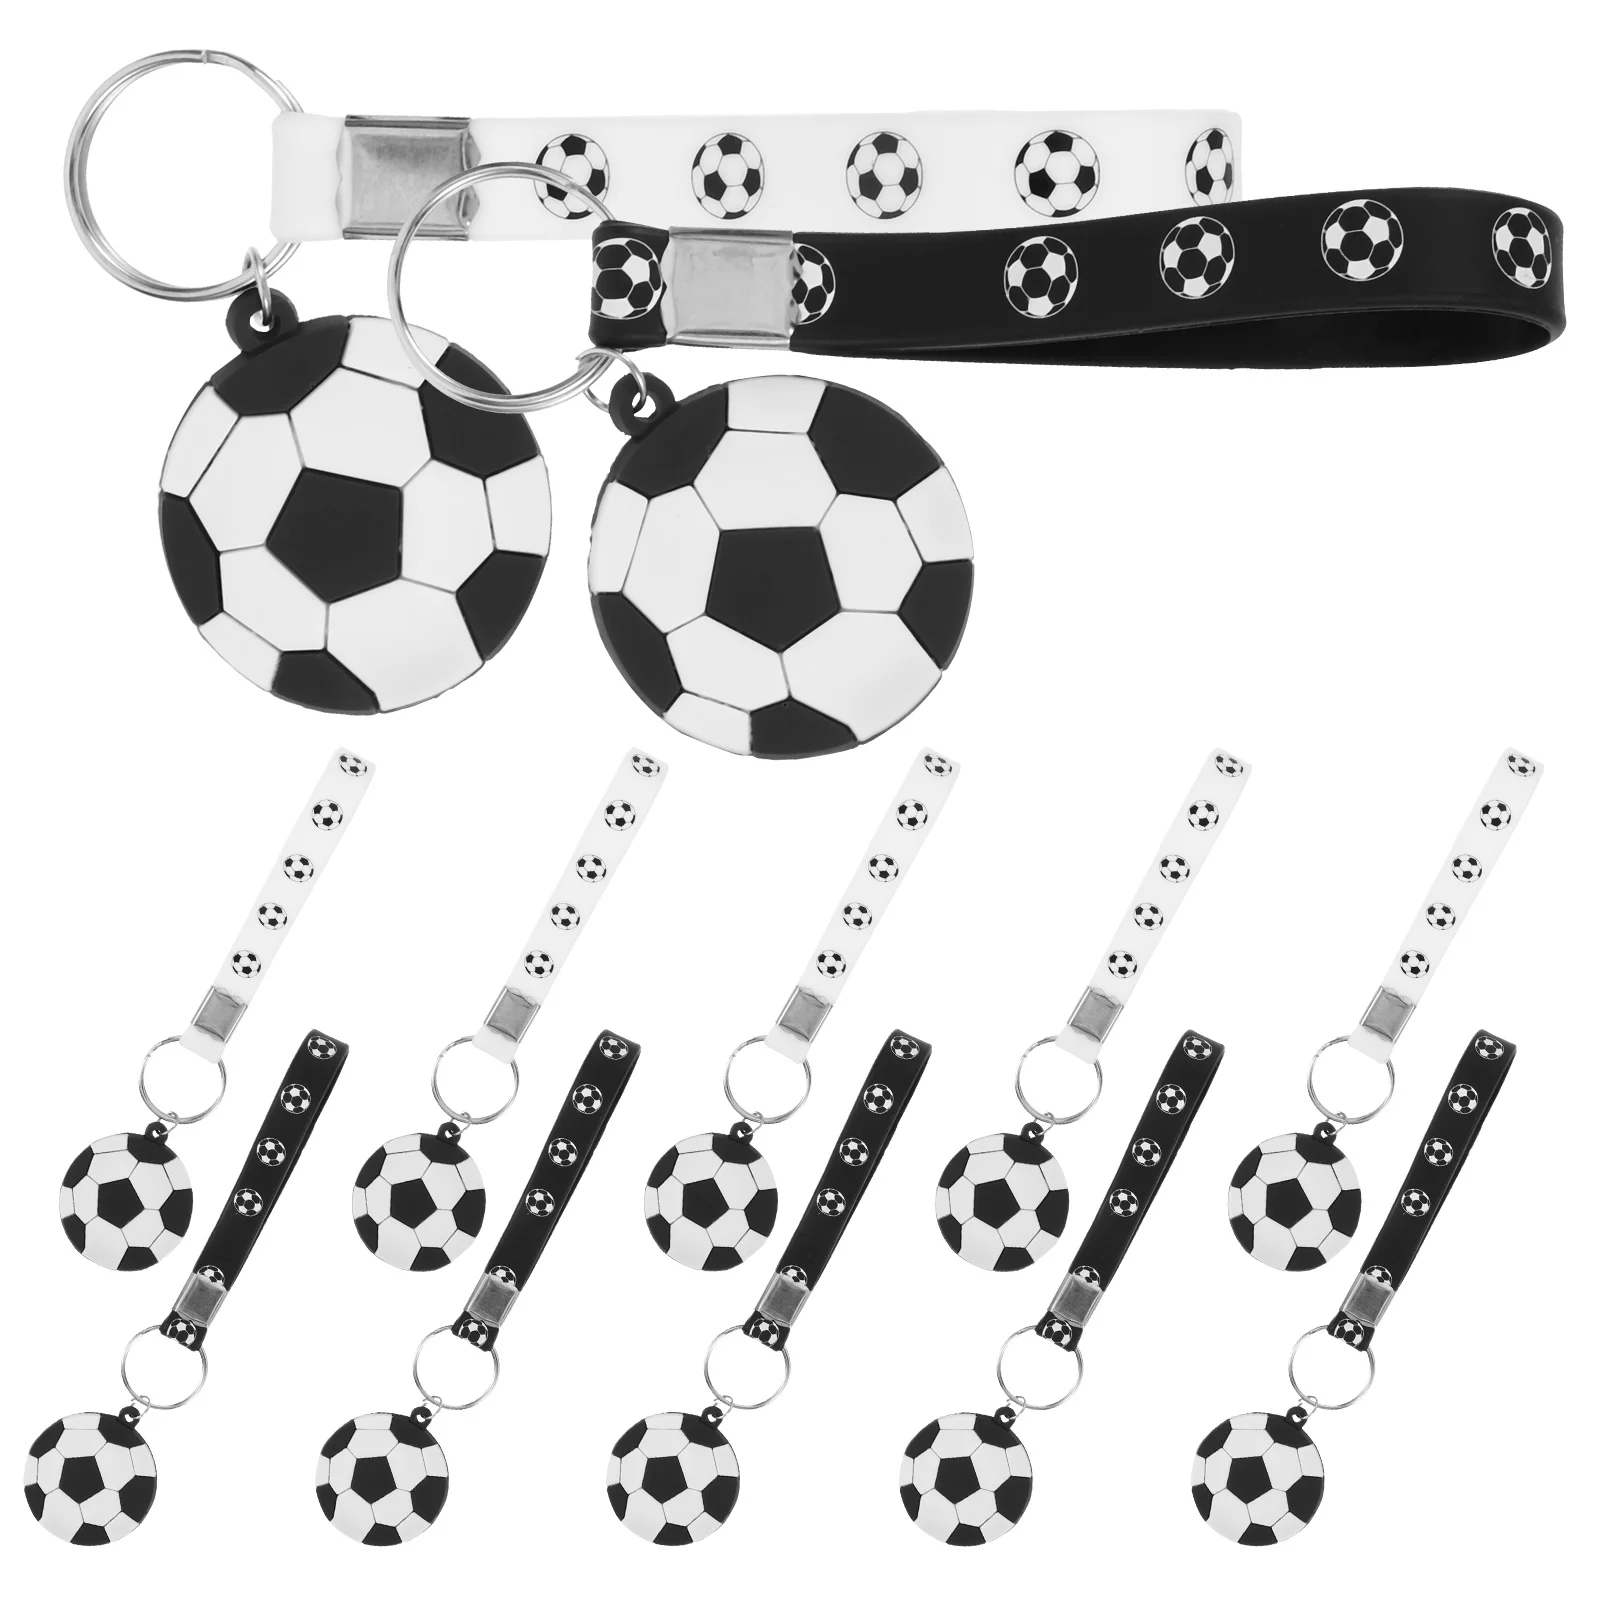 

12 Pcs Football Key Ring Hanging Small Keychains Car Gifts Adorable Decor Silica Gel Sports Soccer Portable Student